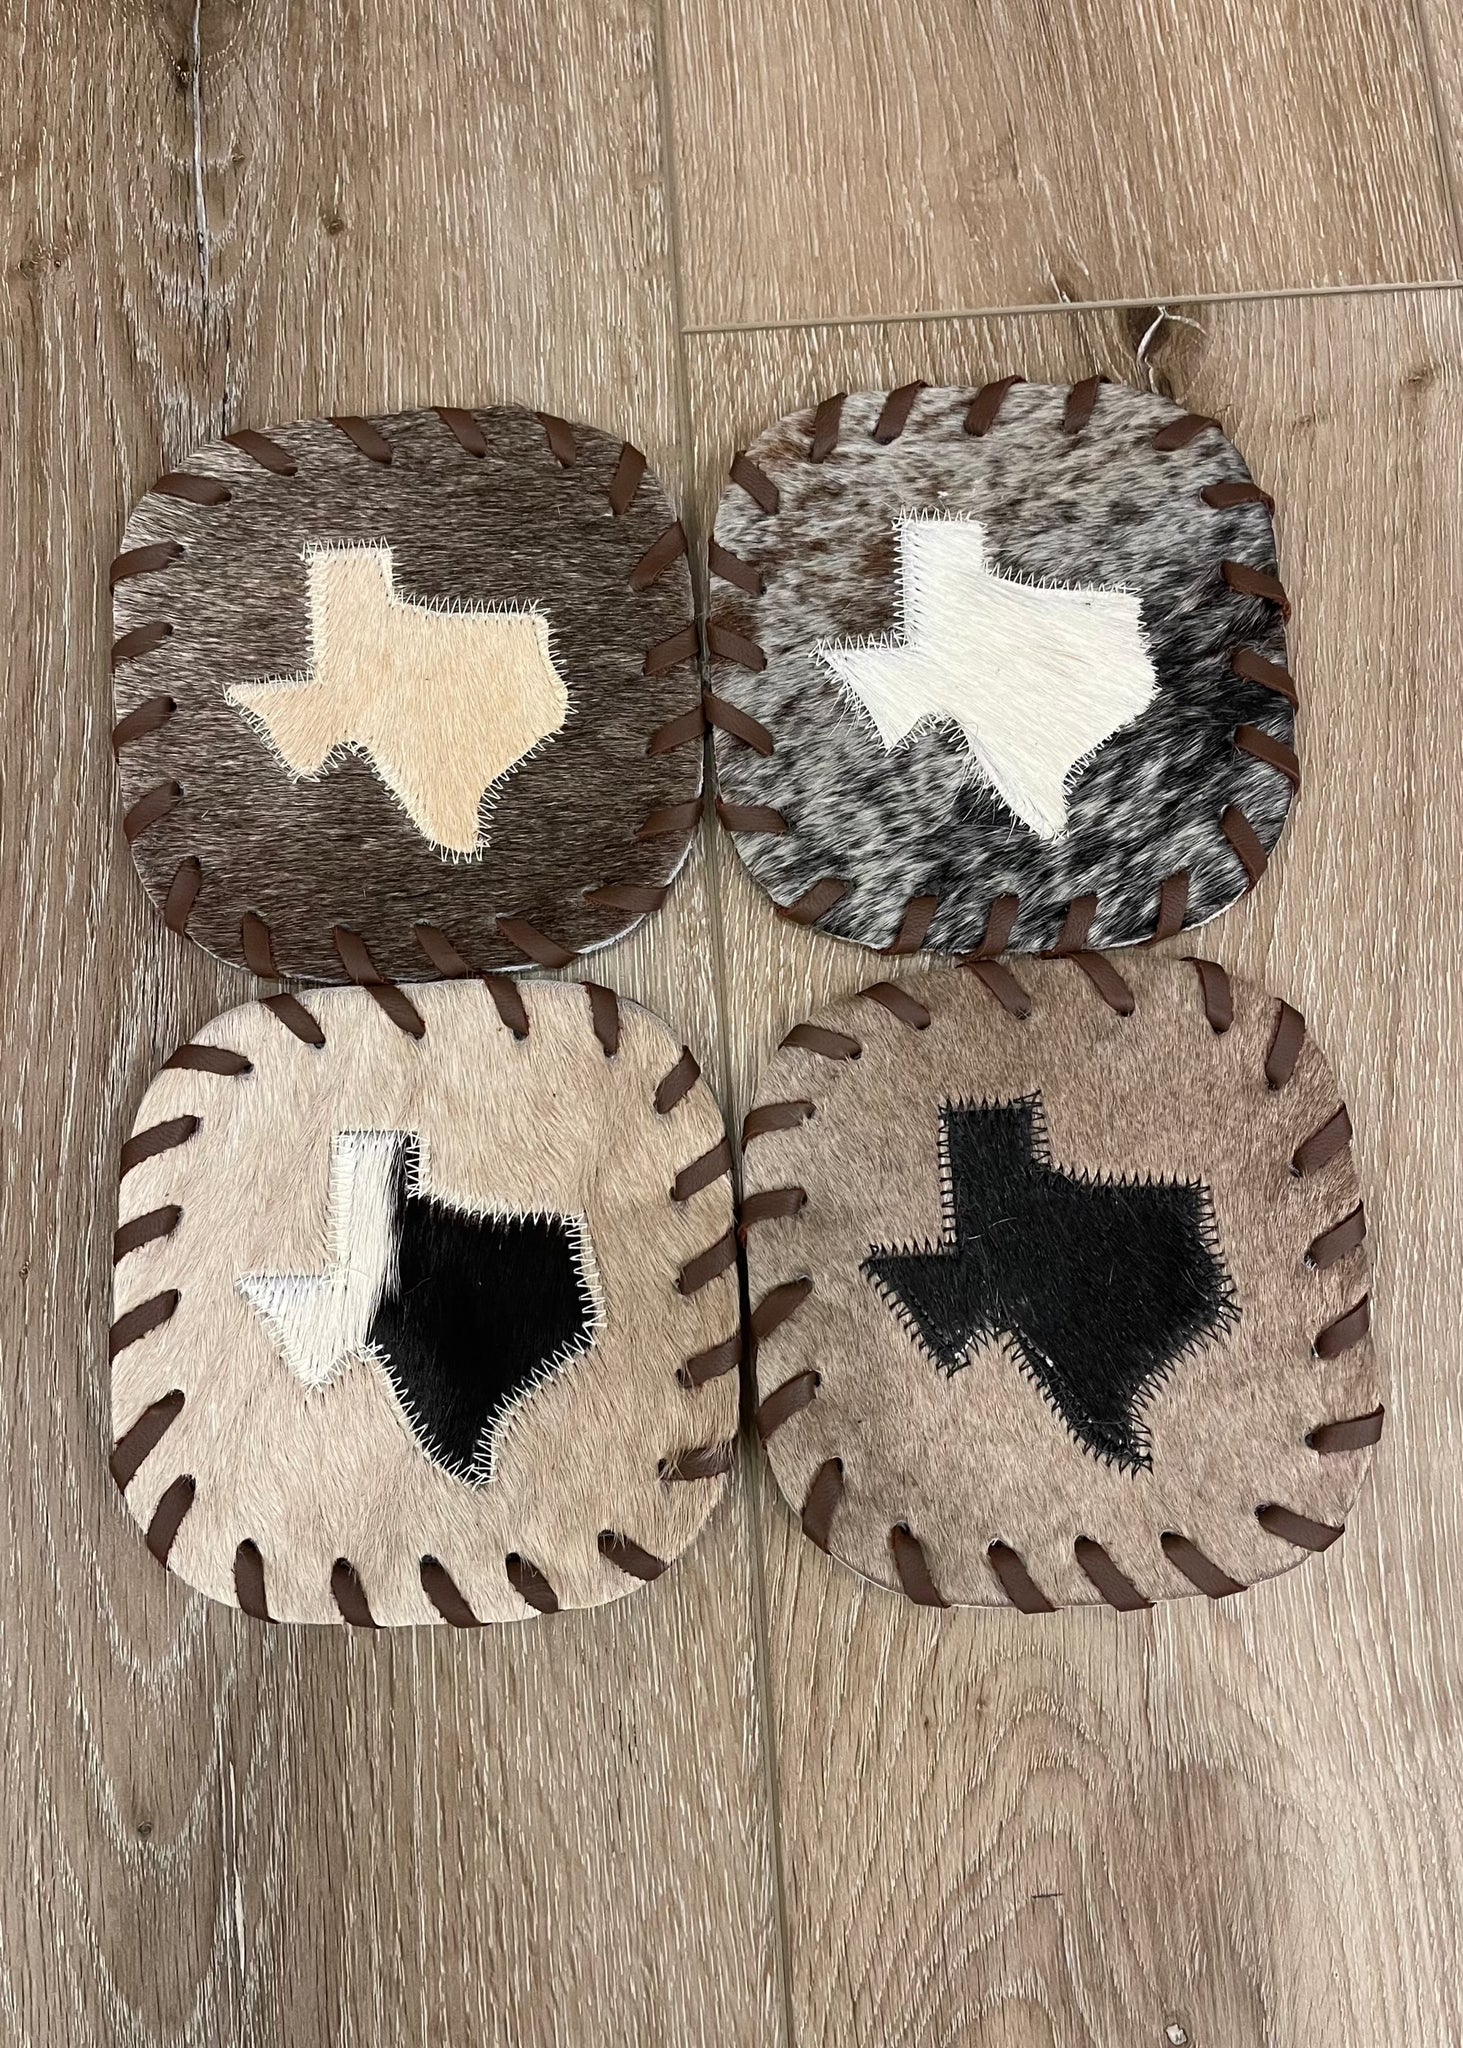 Texas Cowhide Leather Coasters ~ Set of 4